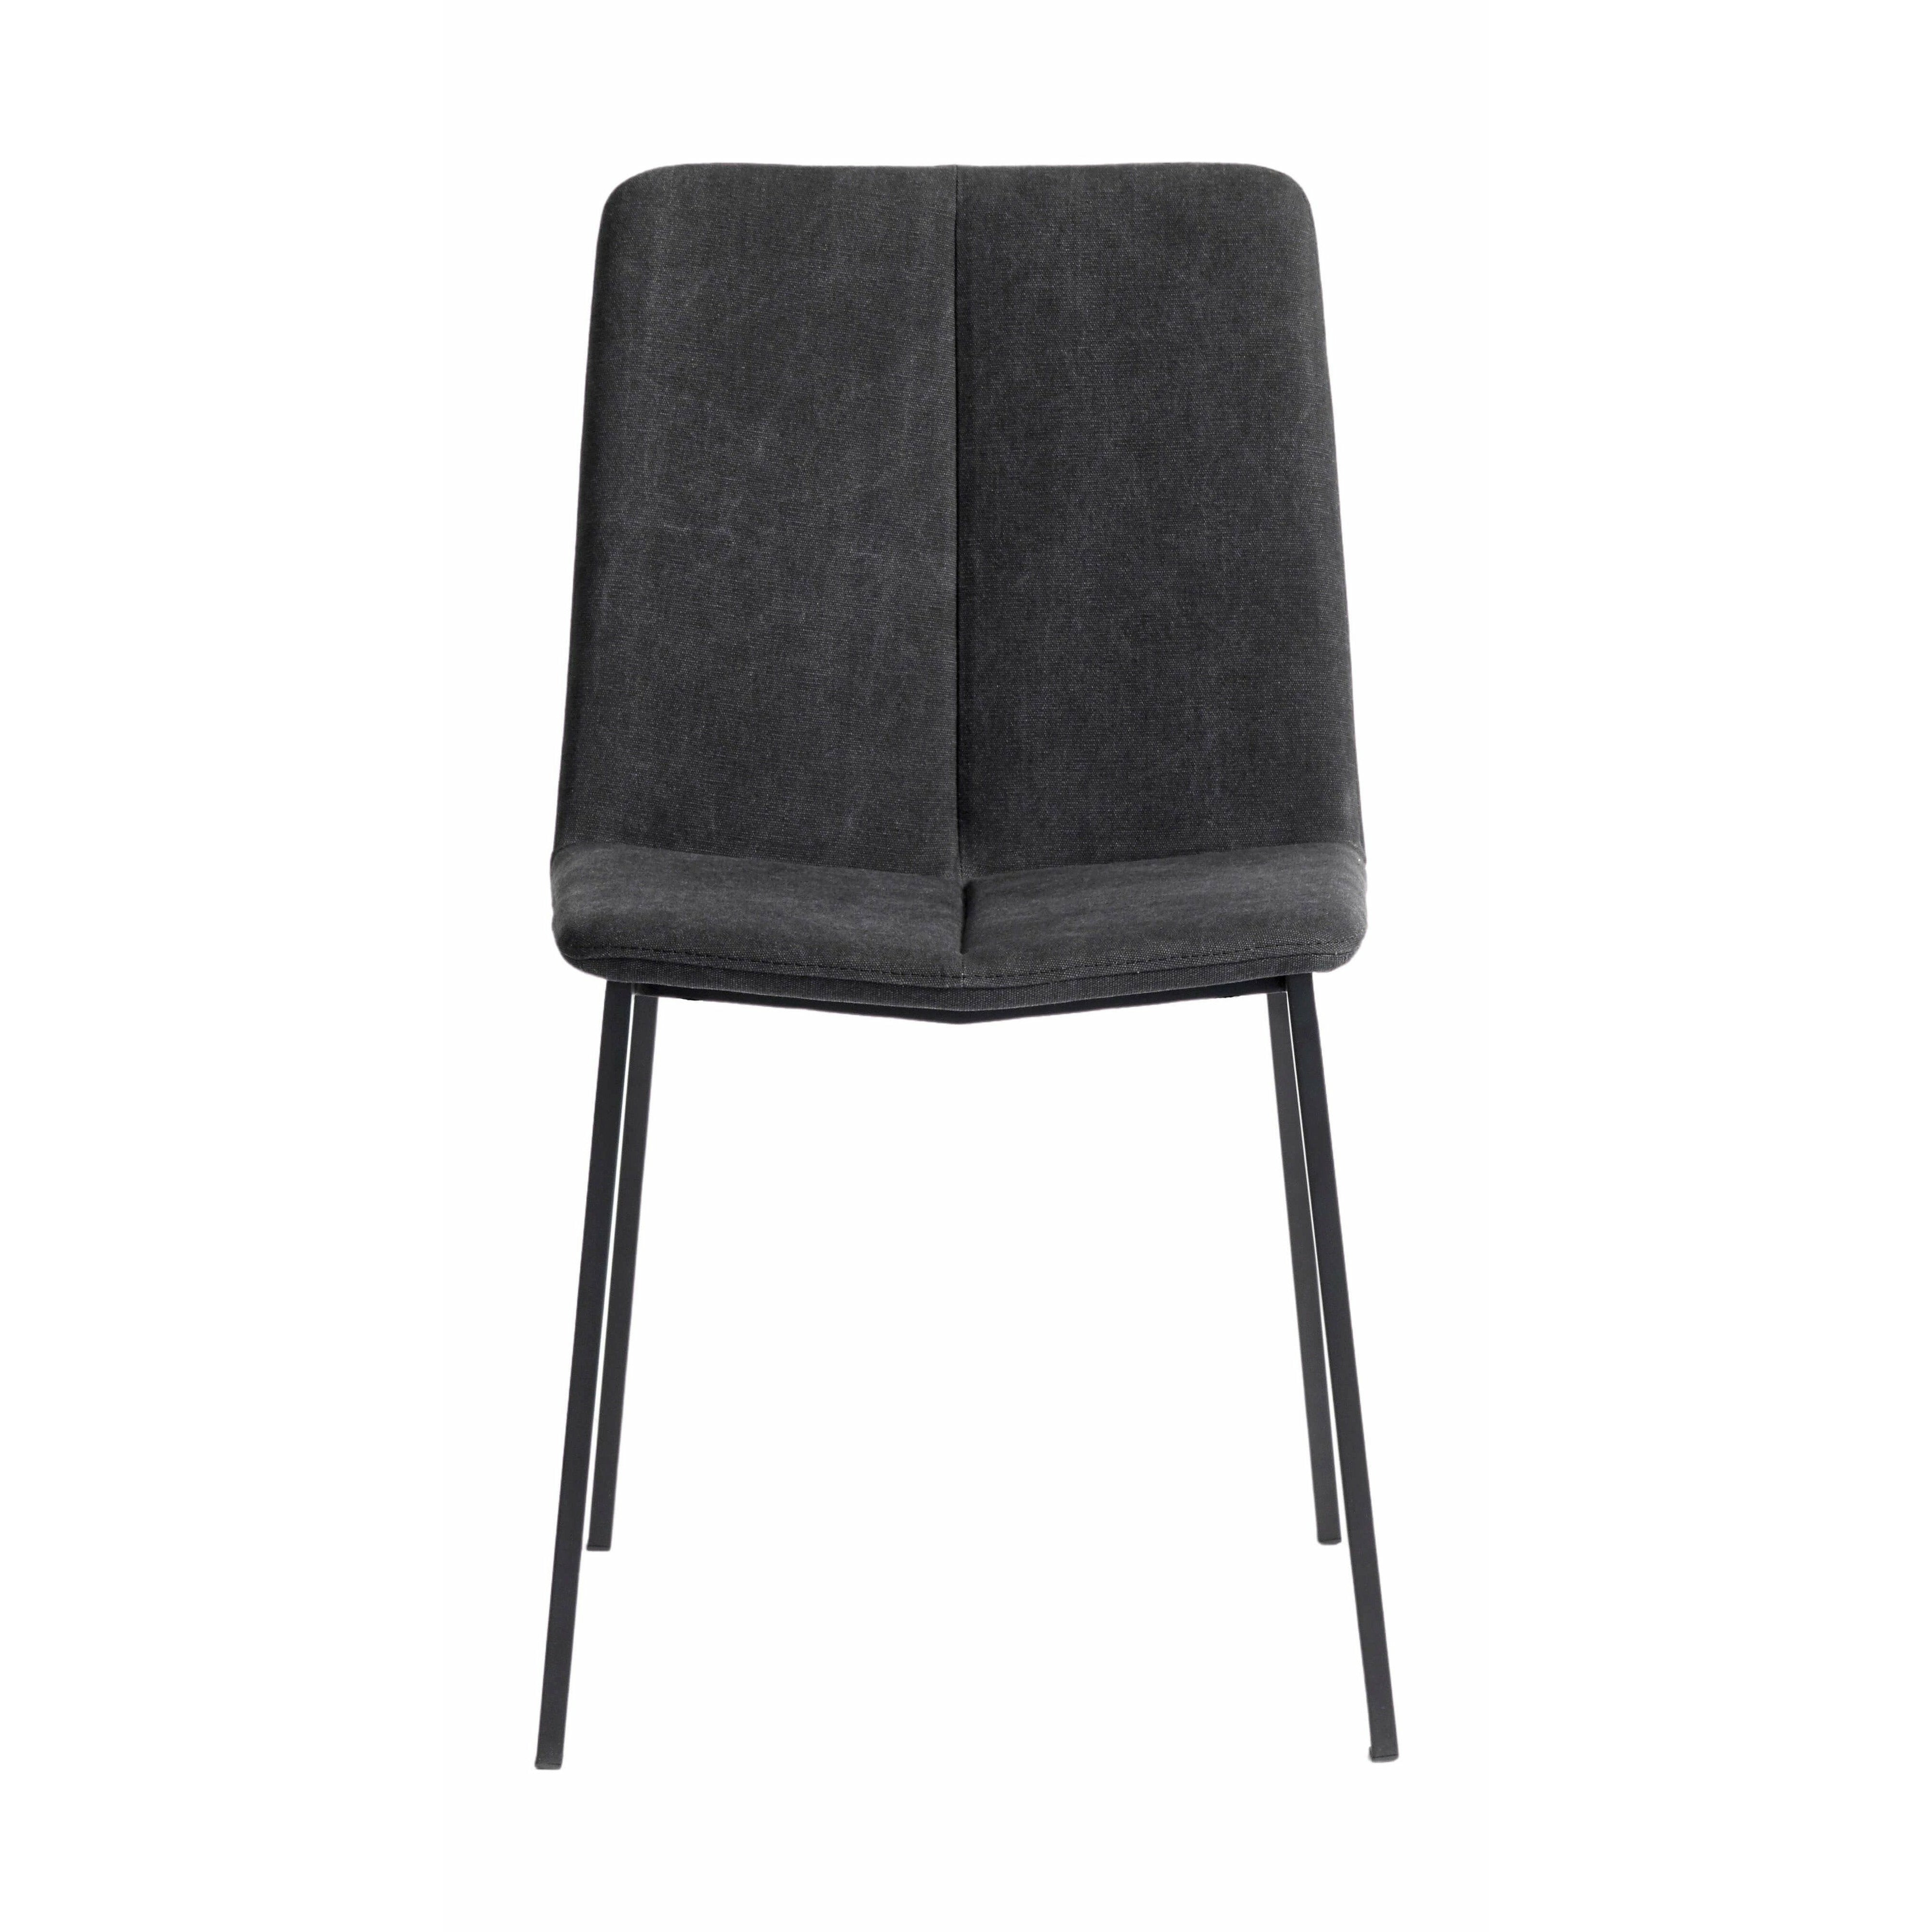 Muubs Chamfer Dining Chair, Anthracite